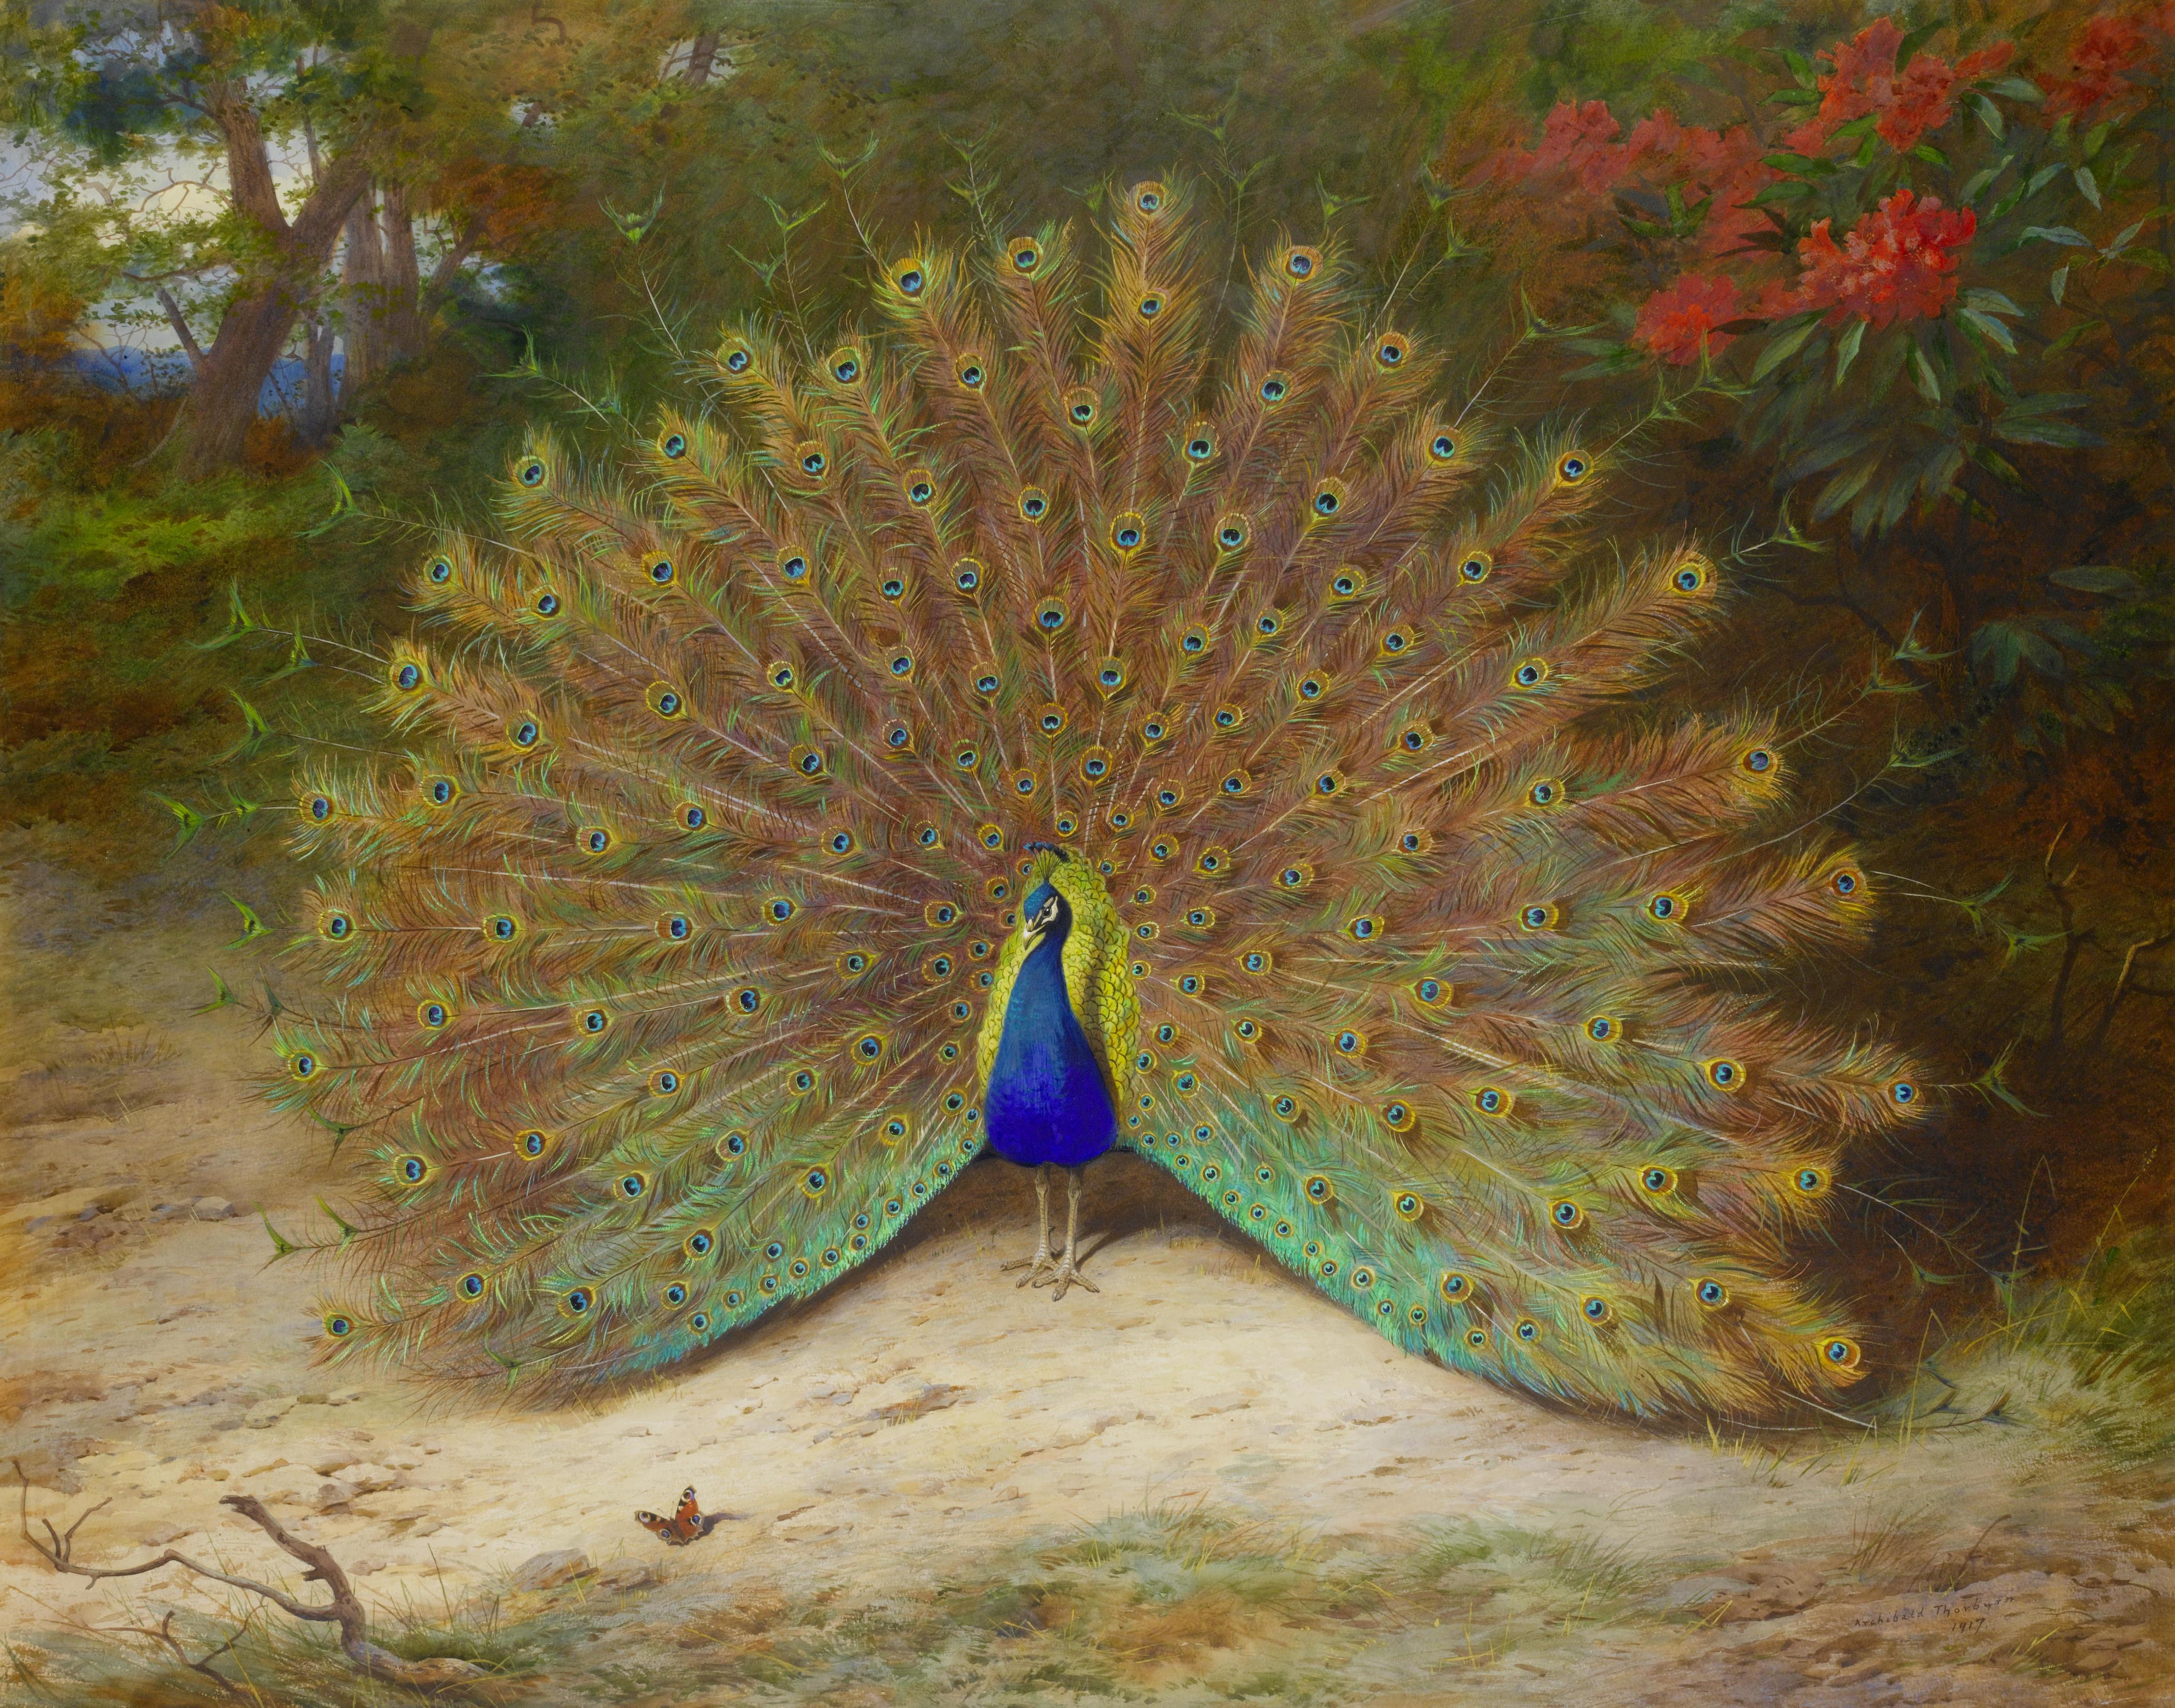 The Peacock in Myth, Legend, and 19th Century History